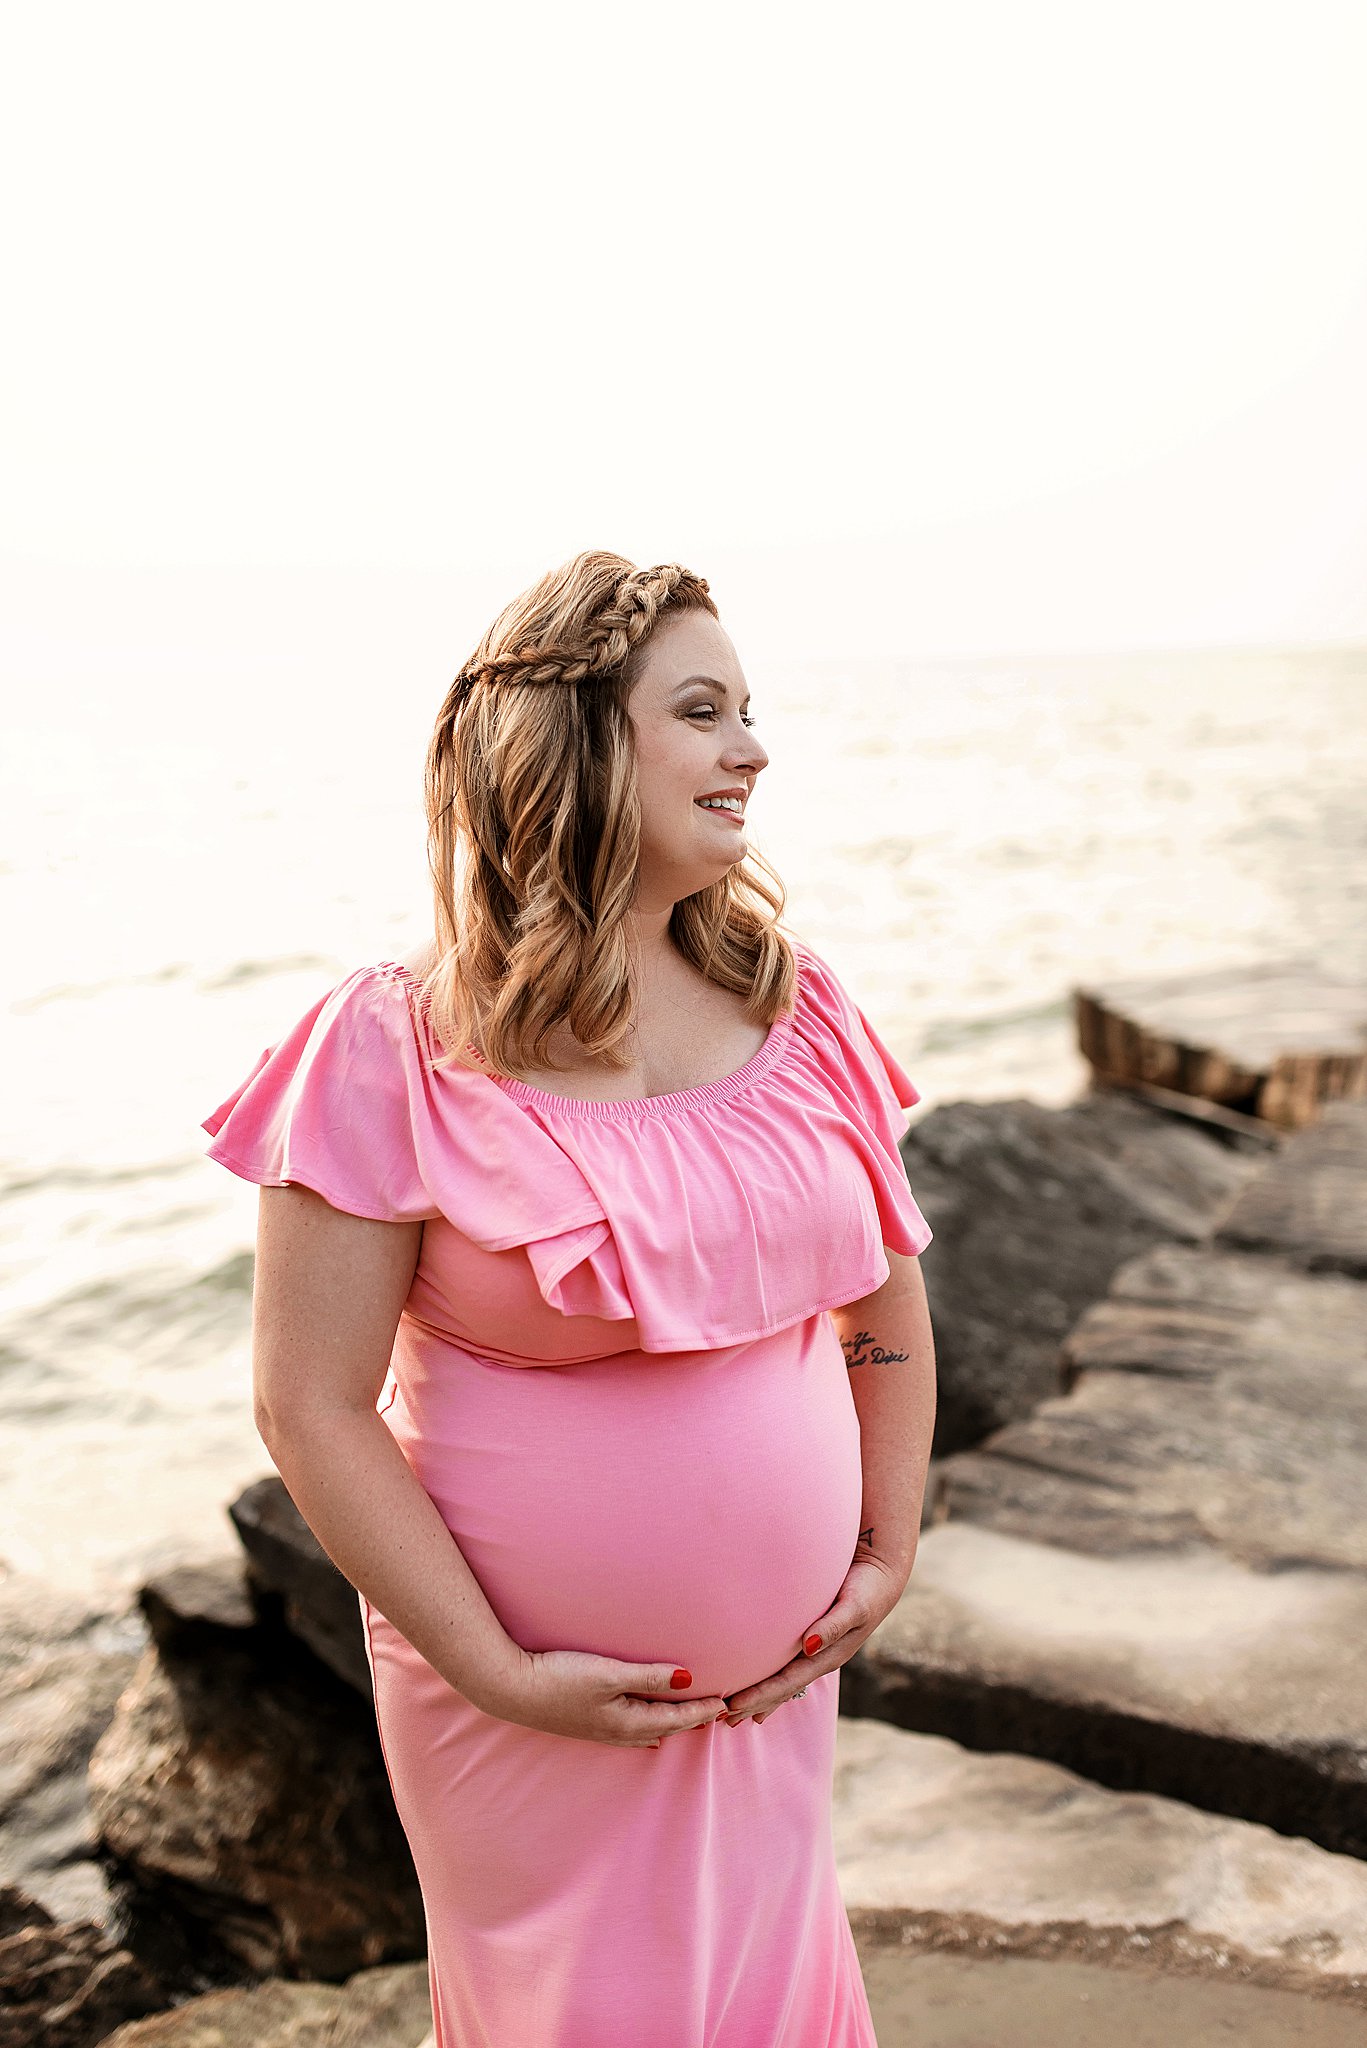 A mother to be in a pink dress stands on some rocks on the beach holding her bump birth center cleveland ohio